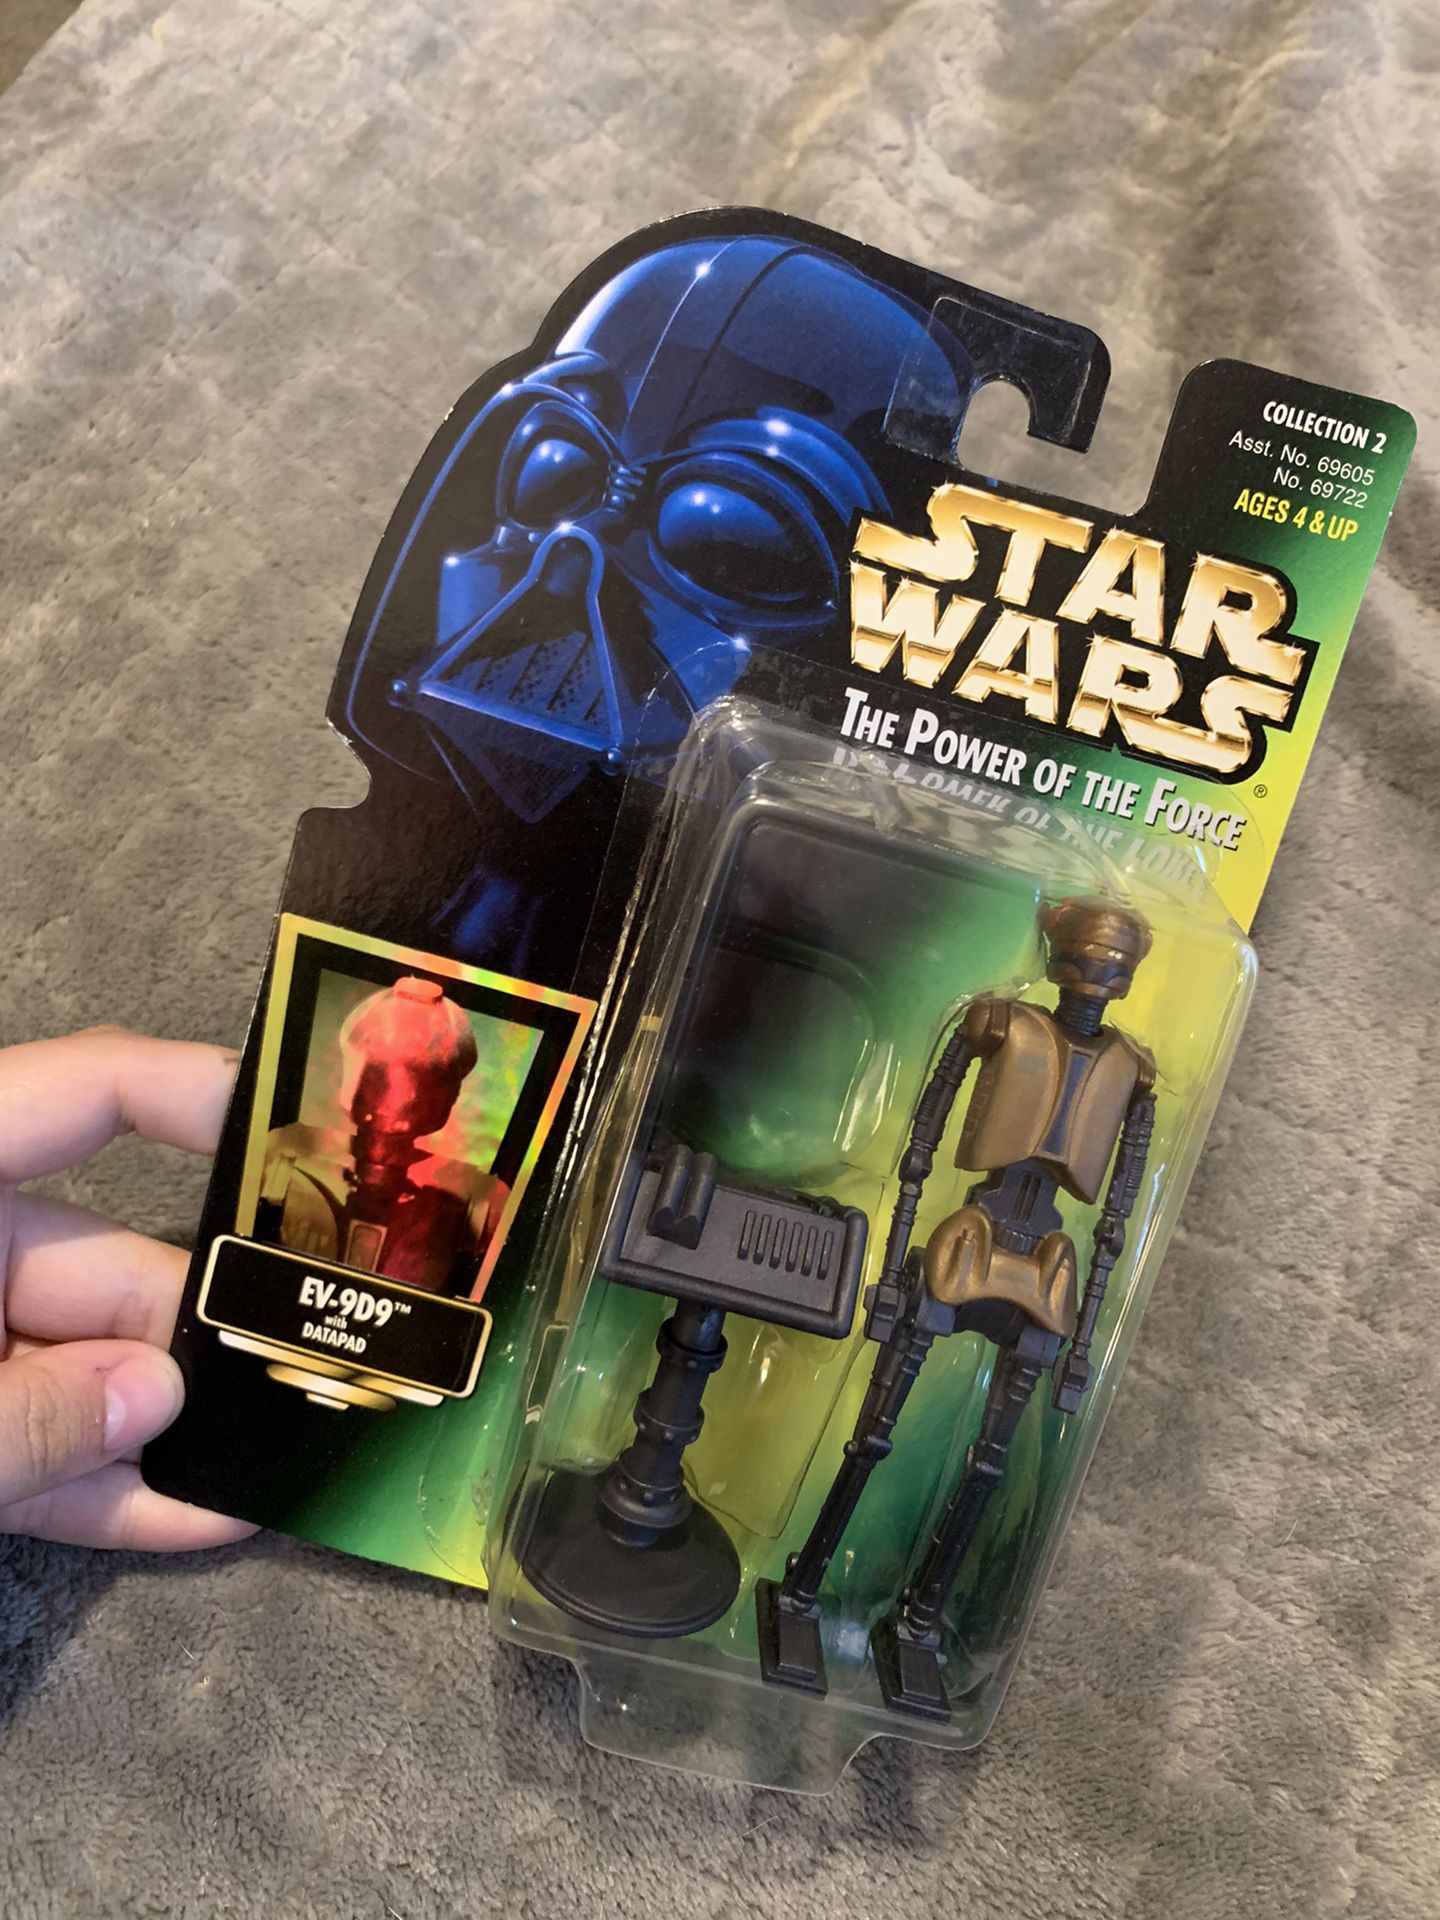 Star Wars Action Figure EV-9D9 with Datapad POTF 1997 Collection 2